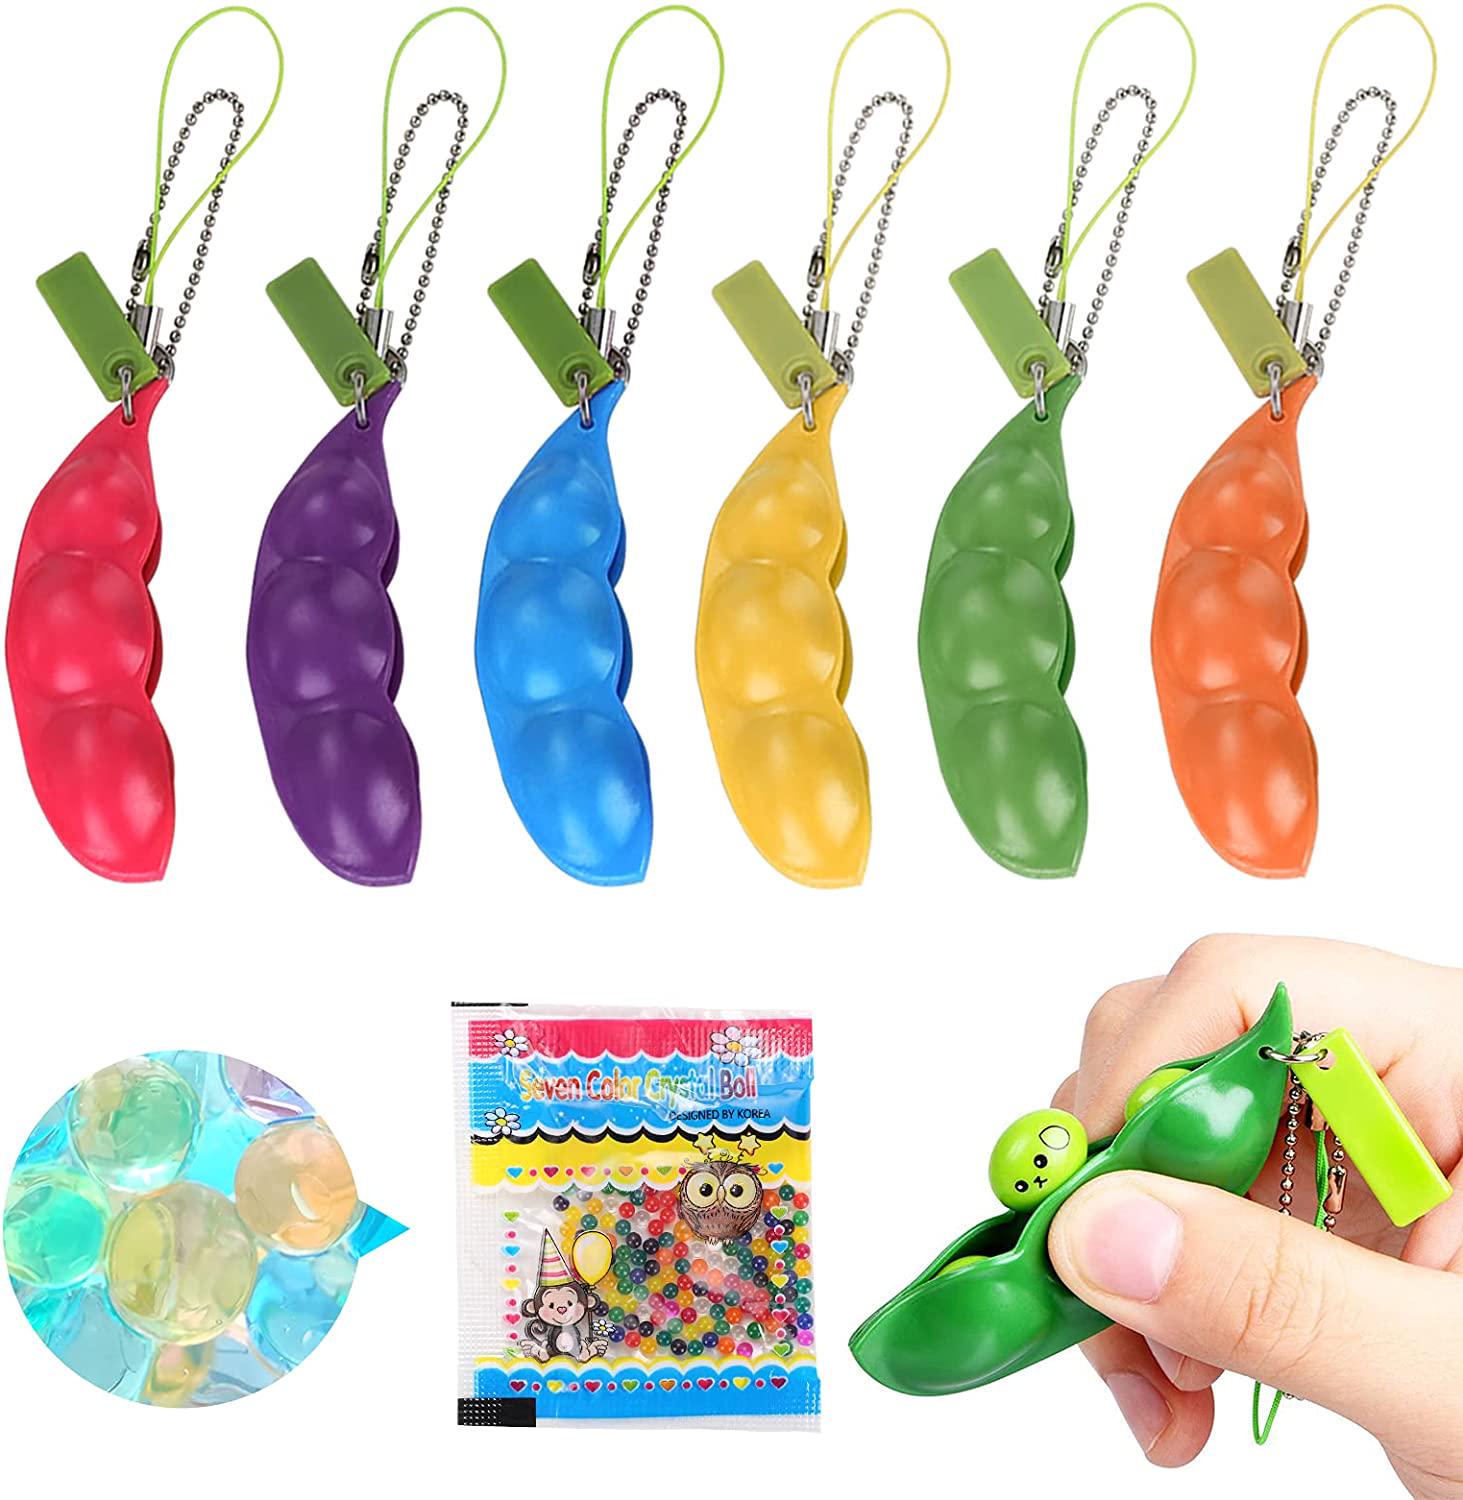 Midook, Midook Fidget Bean Toy,Squeeze-a-Bean,Sensory Edamame Keychain Toys for Kids and Adult Release Stress and Anxiety,Soybean Toys Gift (6 Pack Colourful)